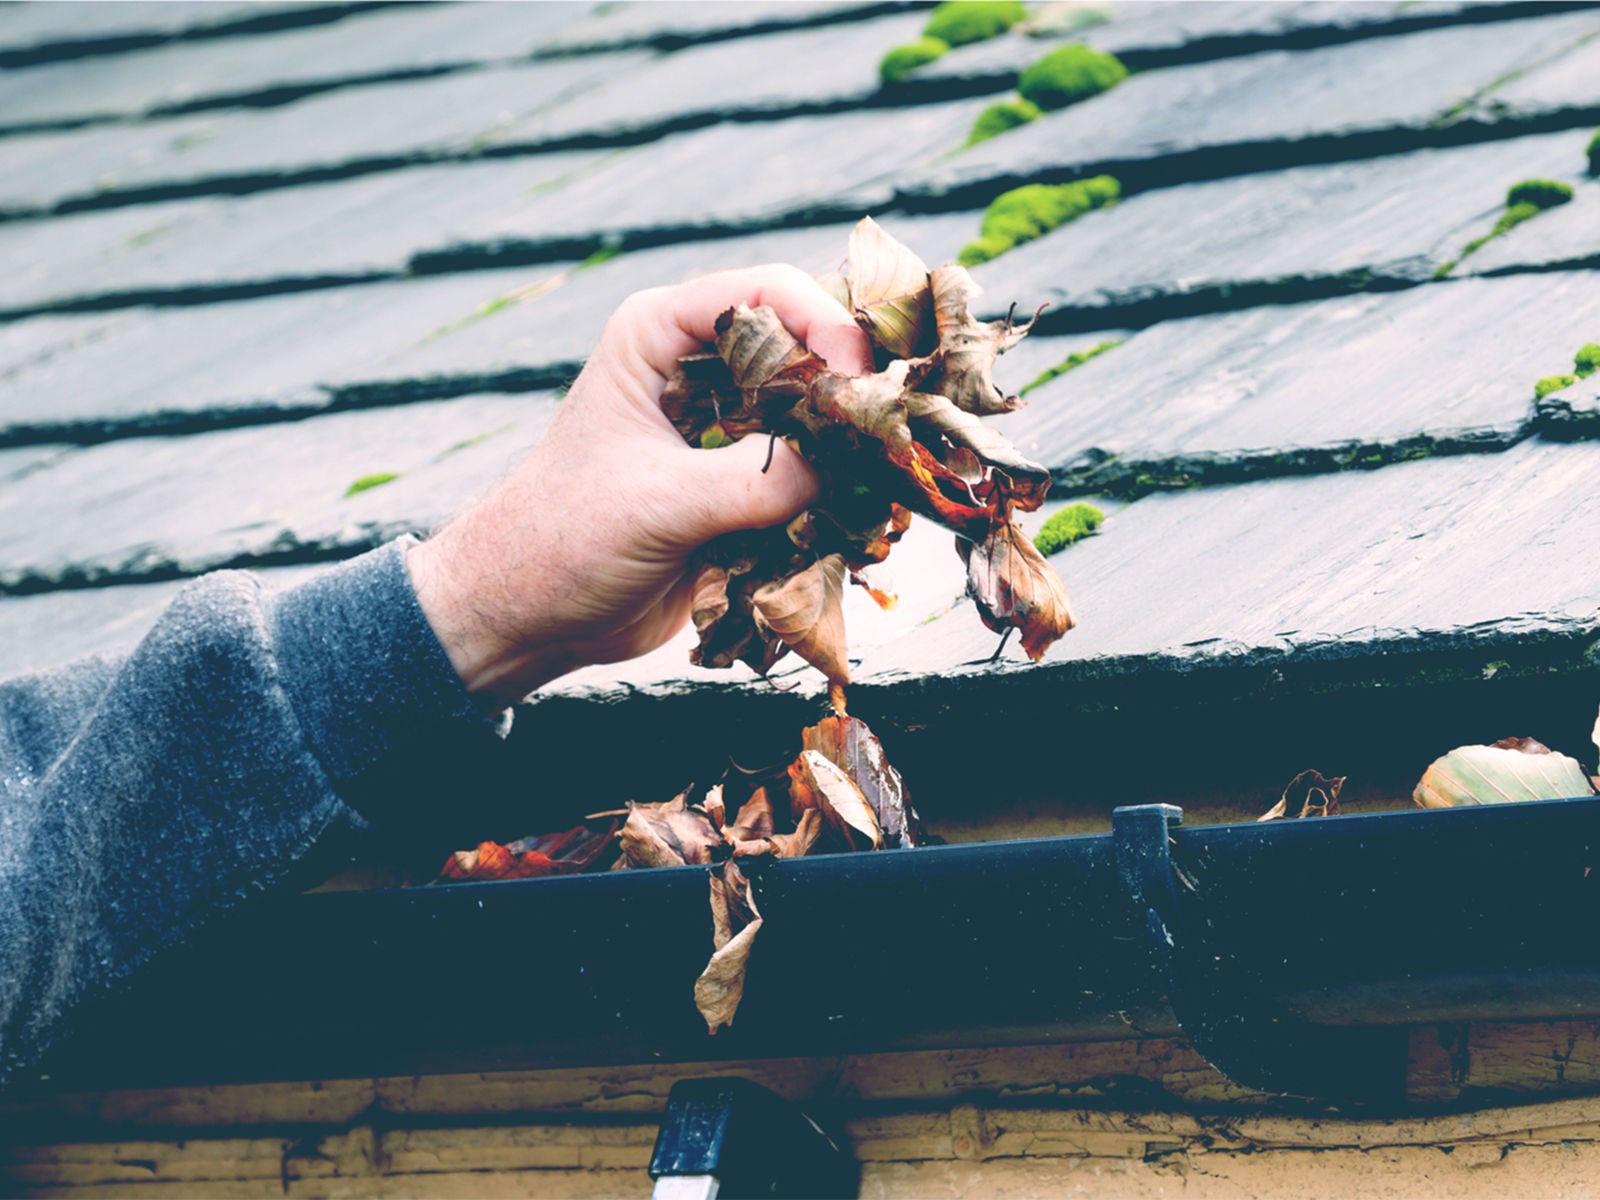 A hand clearing fallen leaves from an obstructed rain gutter on the side of a roof.